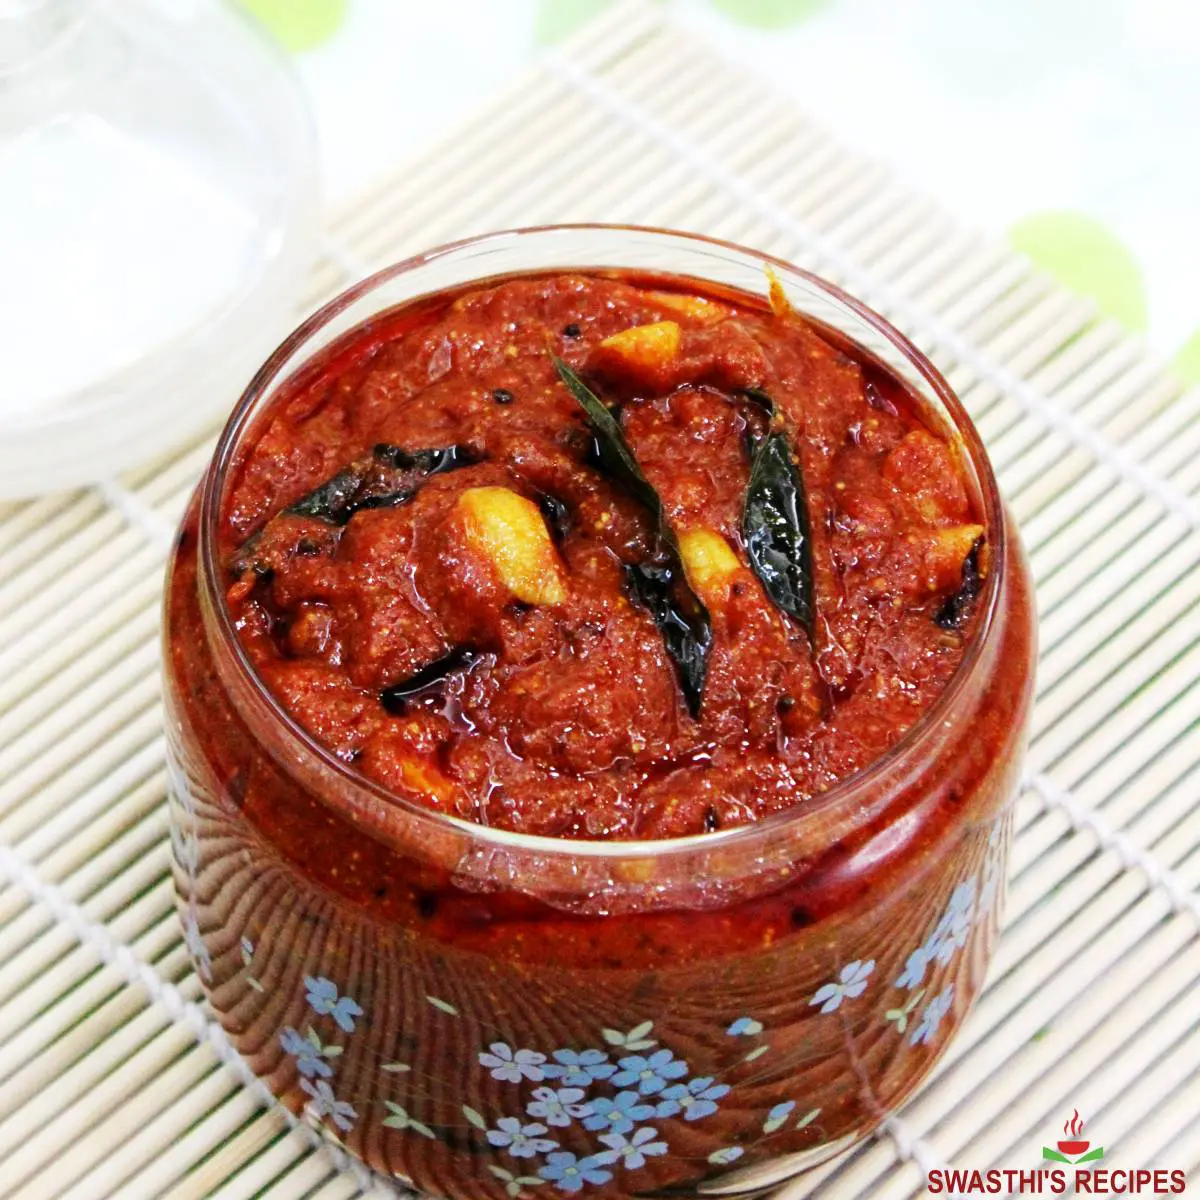 Tomato pickle made in Andhra style with ripe tomatoes, tamarind and spices.